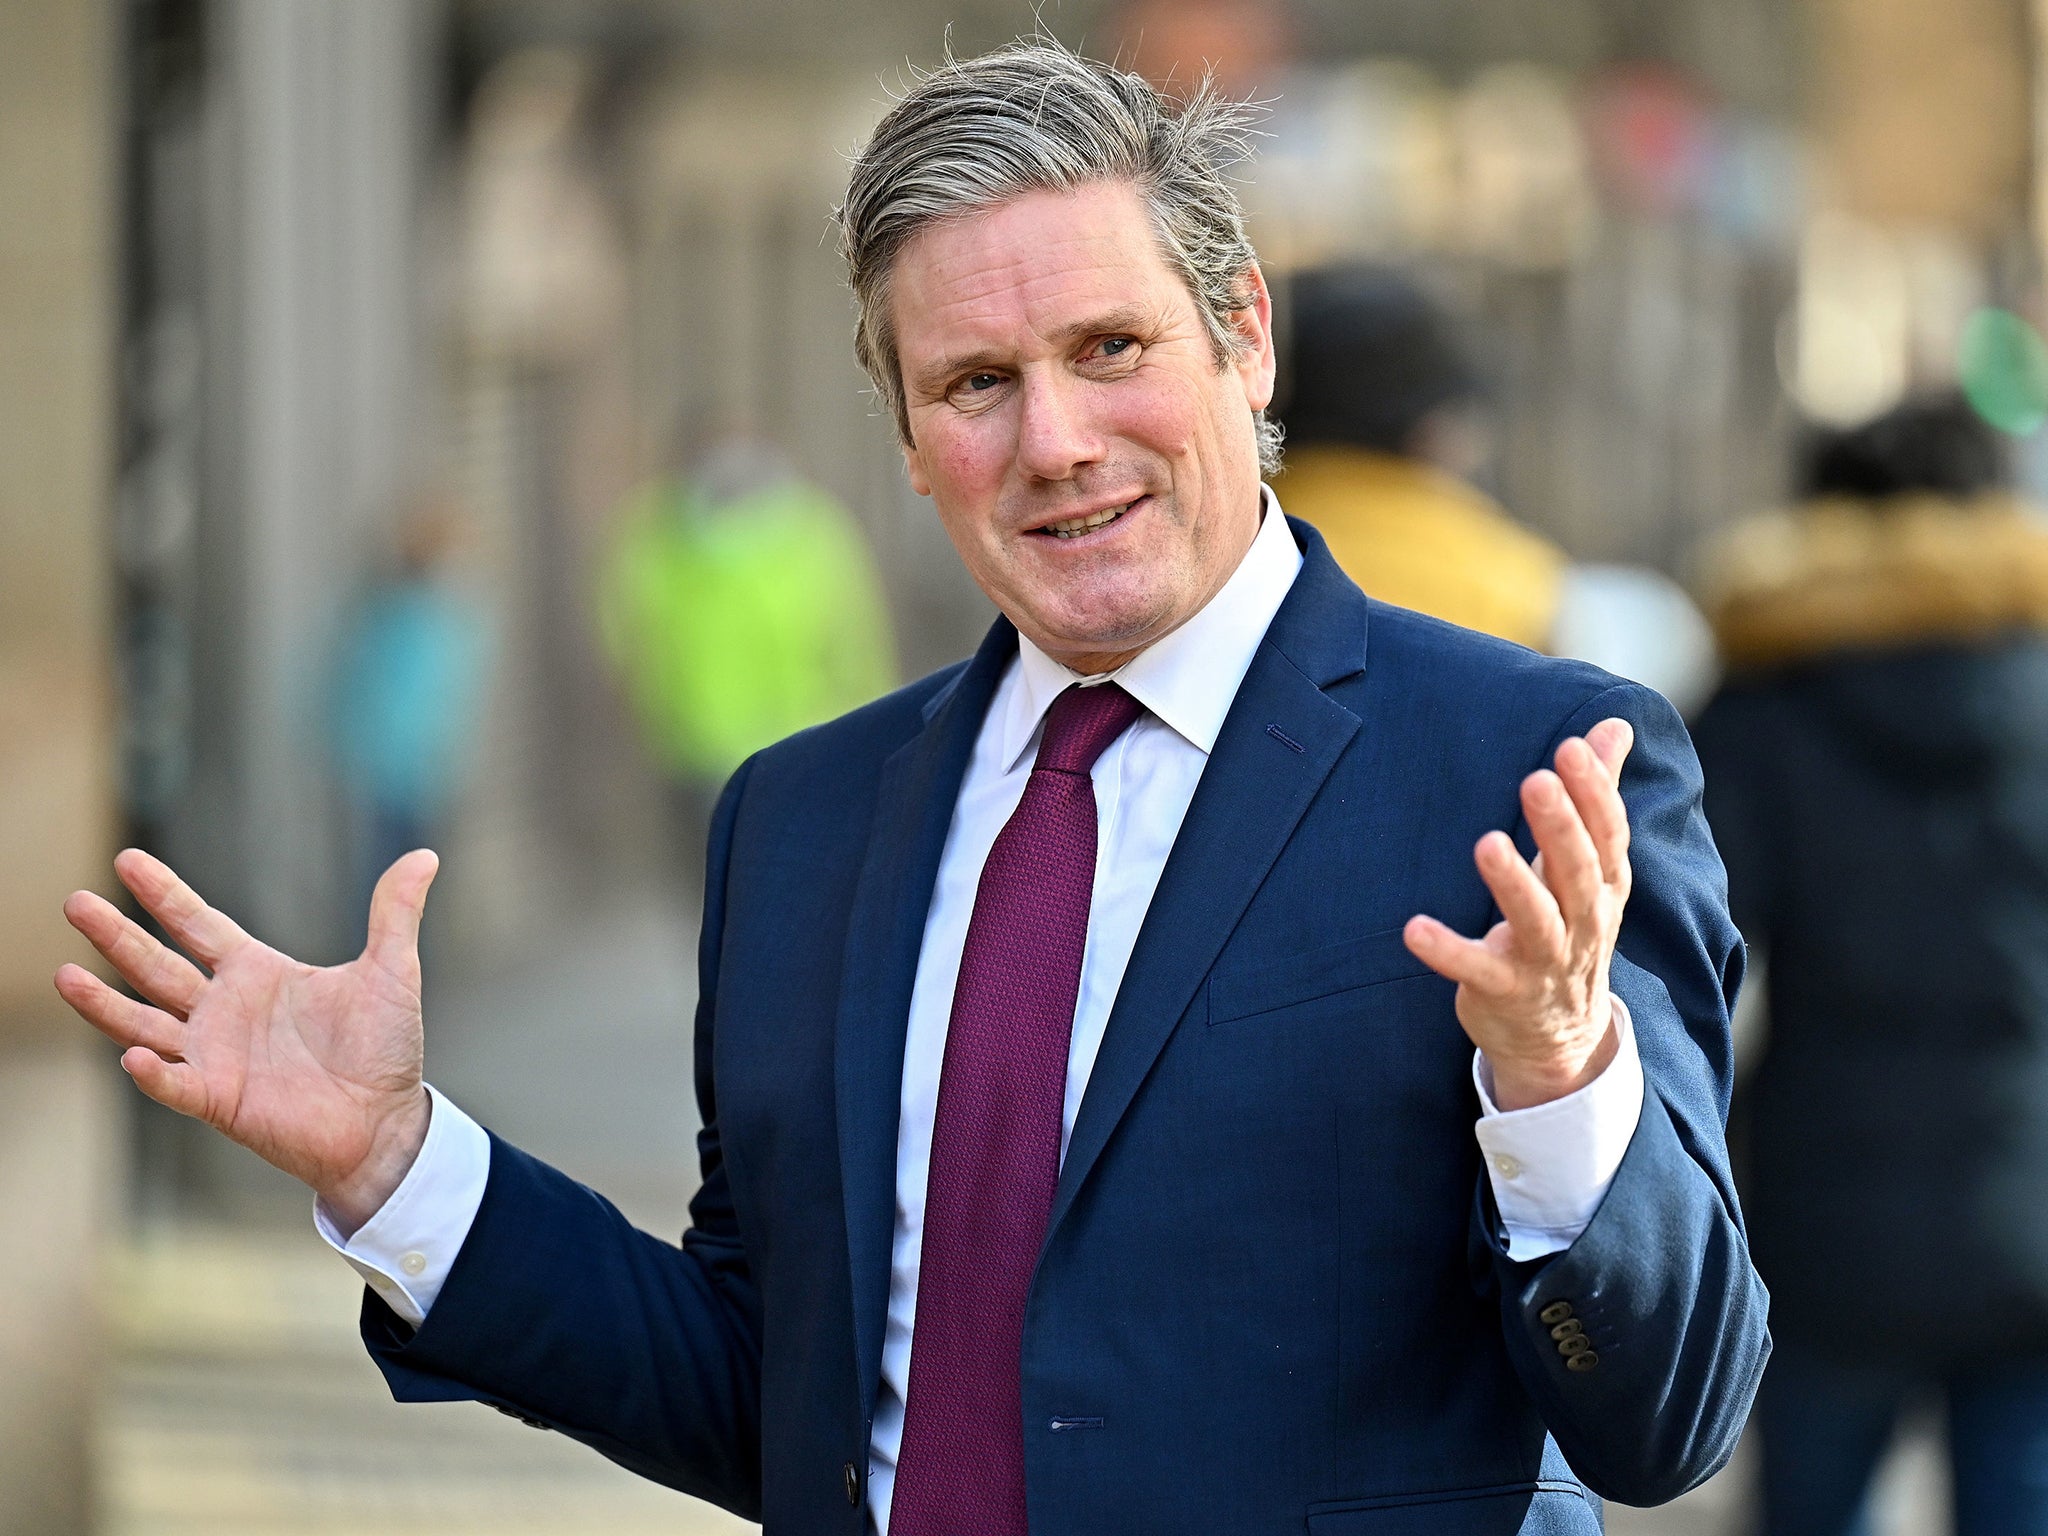 It is time for Keir Starmer to revisit the 10 policies he stood on – policies popular with the public